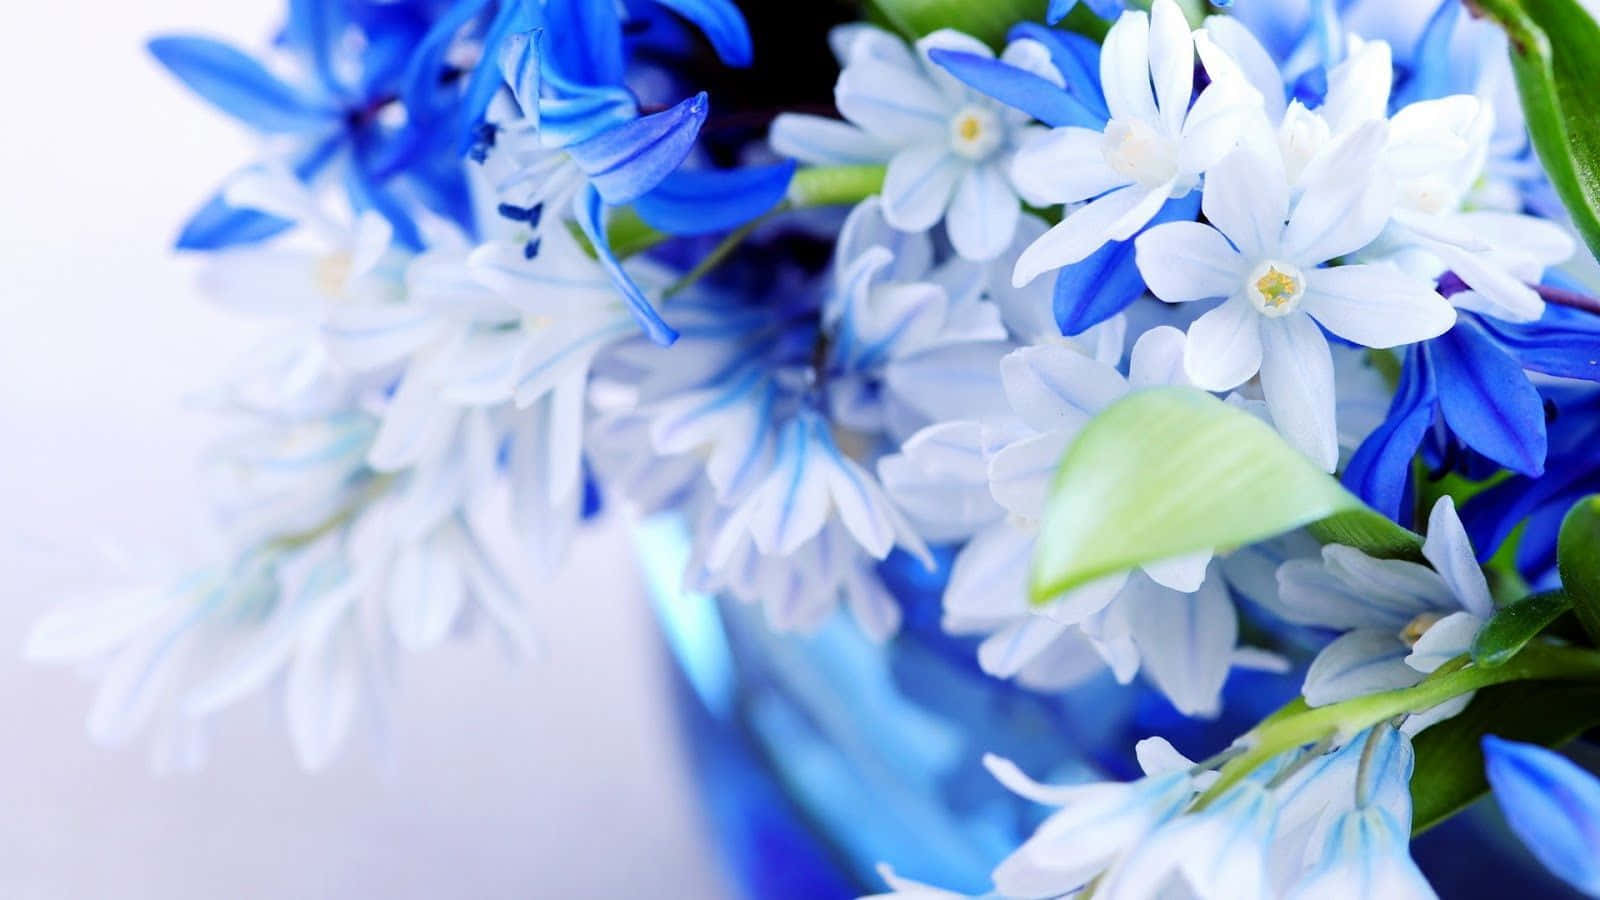 Blue And White Flowers In A Vase